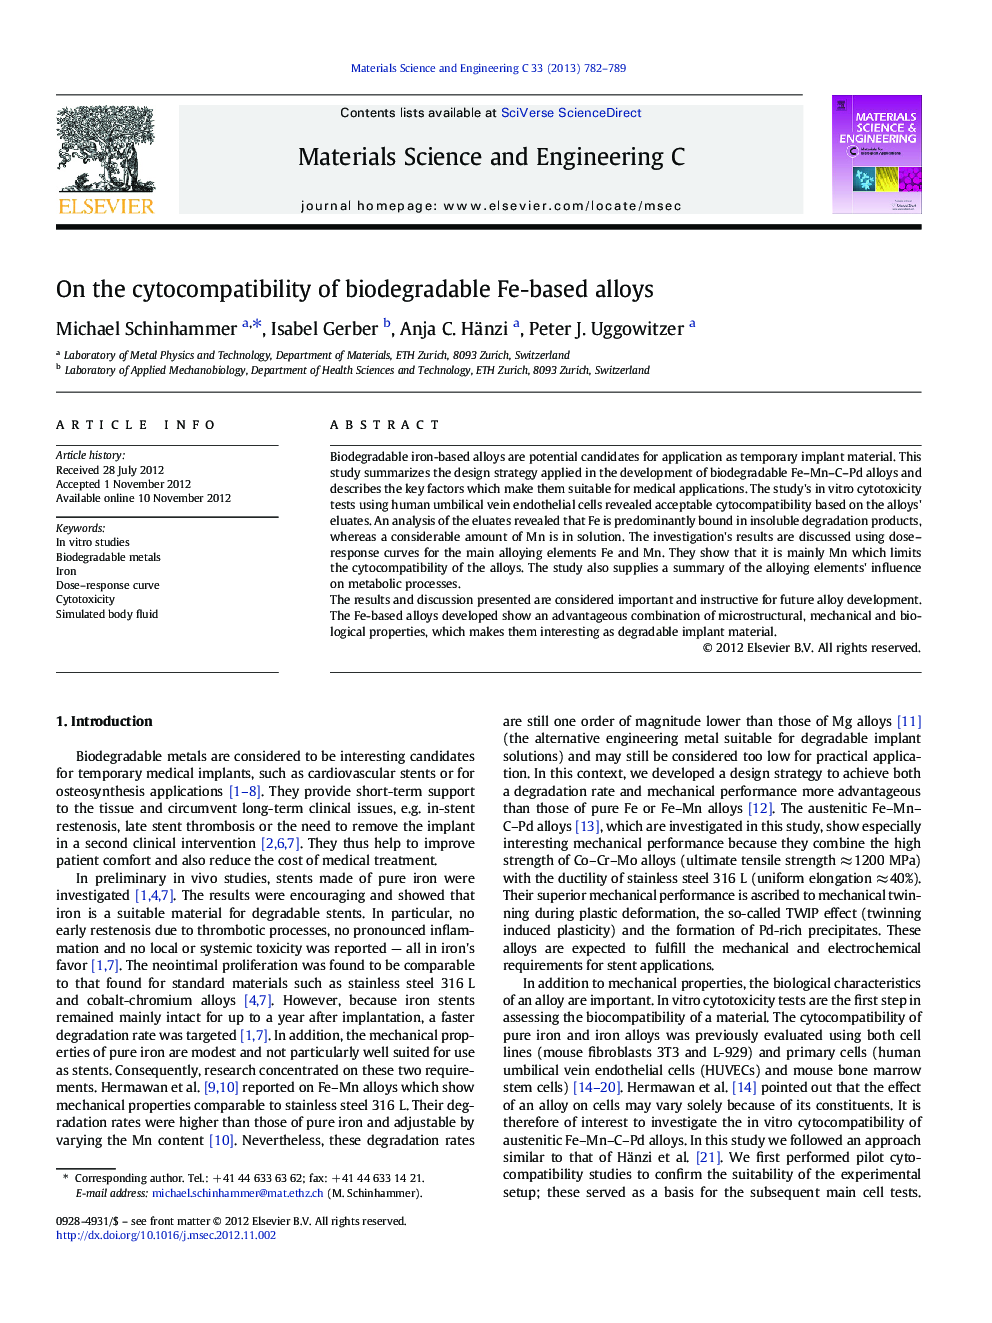 On the cytocompatibility of biodegradable Fe-based alloys